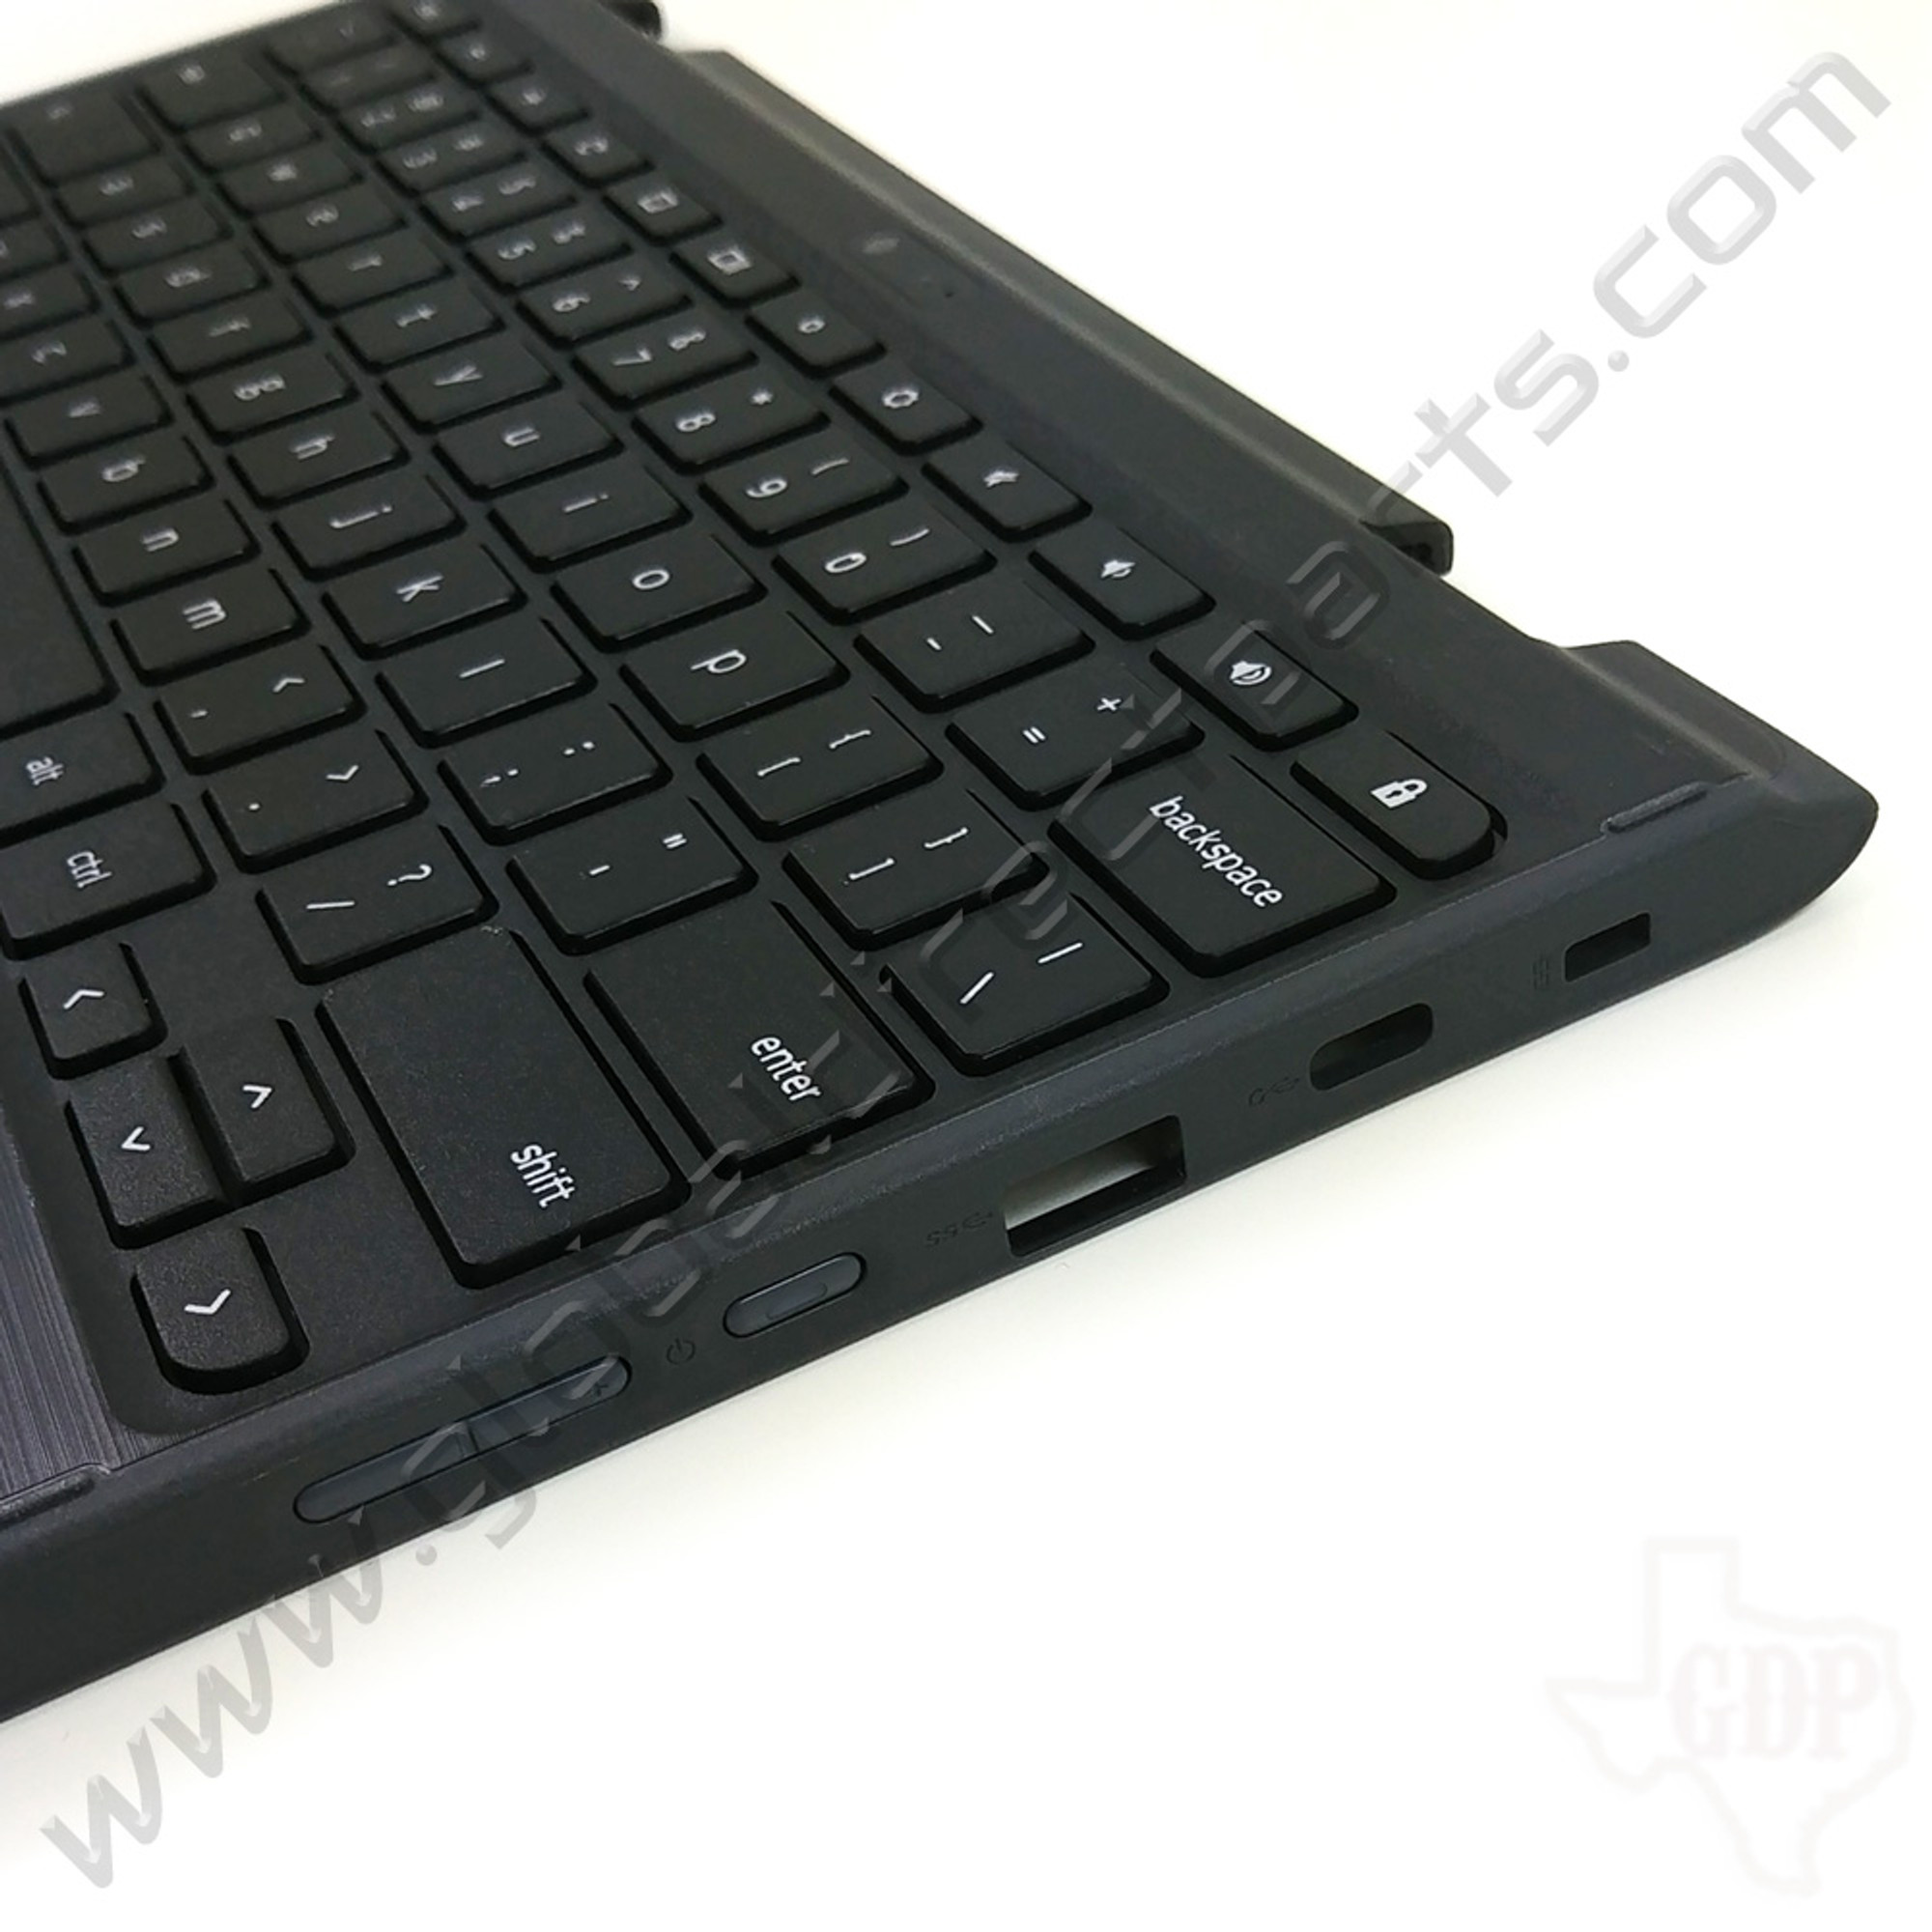 OEM Lenovo 300e Chromebook 2nd Gen 81MB Keyboard with Touchpad [C